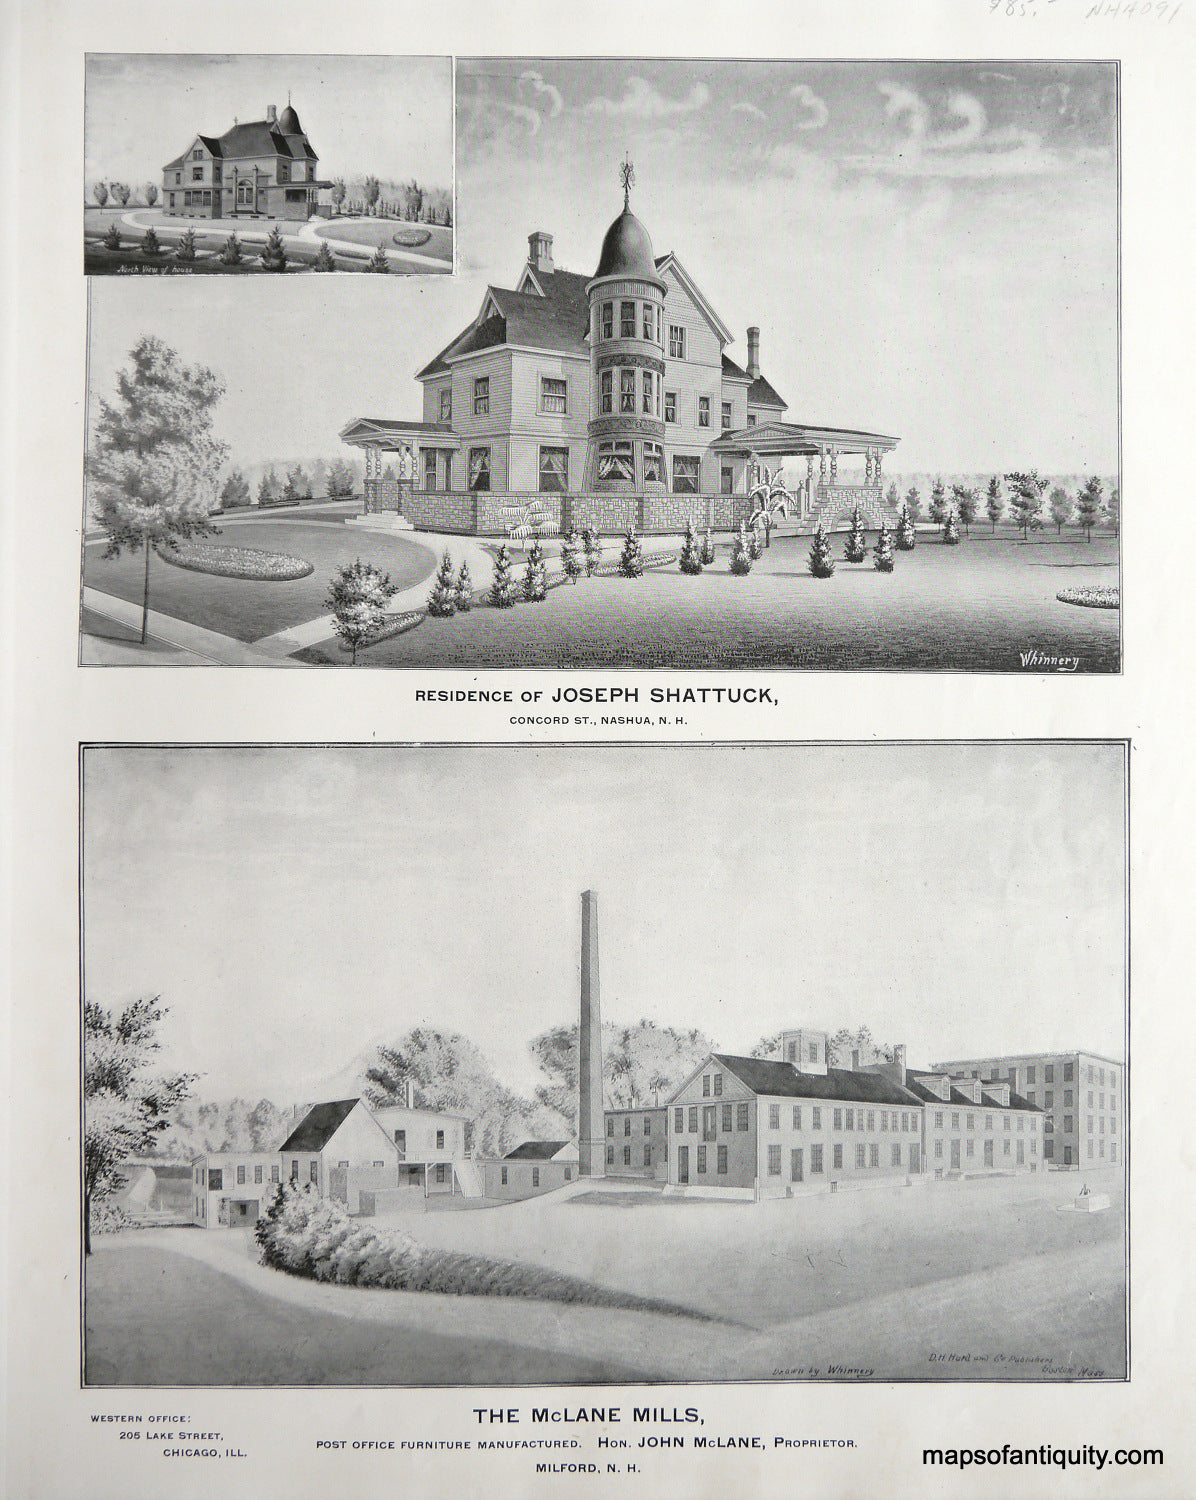 Antique-Illustration-Residence-of-Joseph-Shattuck-Nashua-N.H.-and-The-McLane-Mills-Milford-N.H.-New-Hampshire--1892-Hurd-Maps-Of-Antiquity